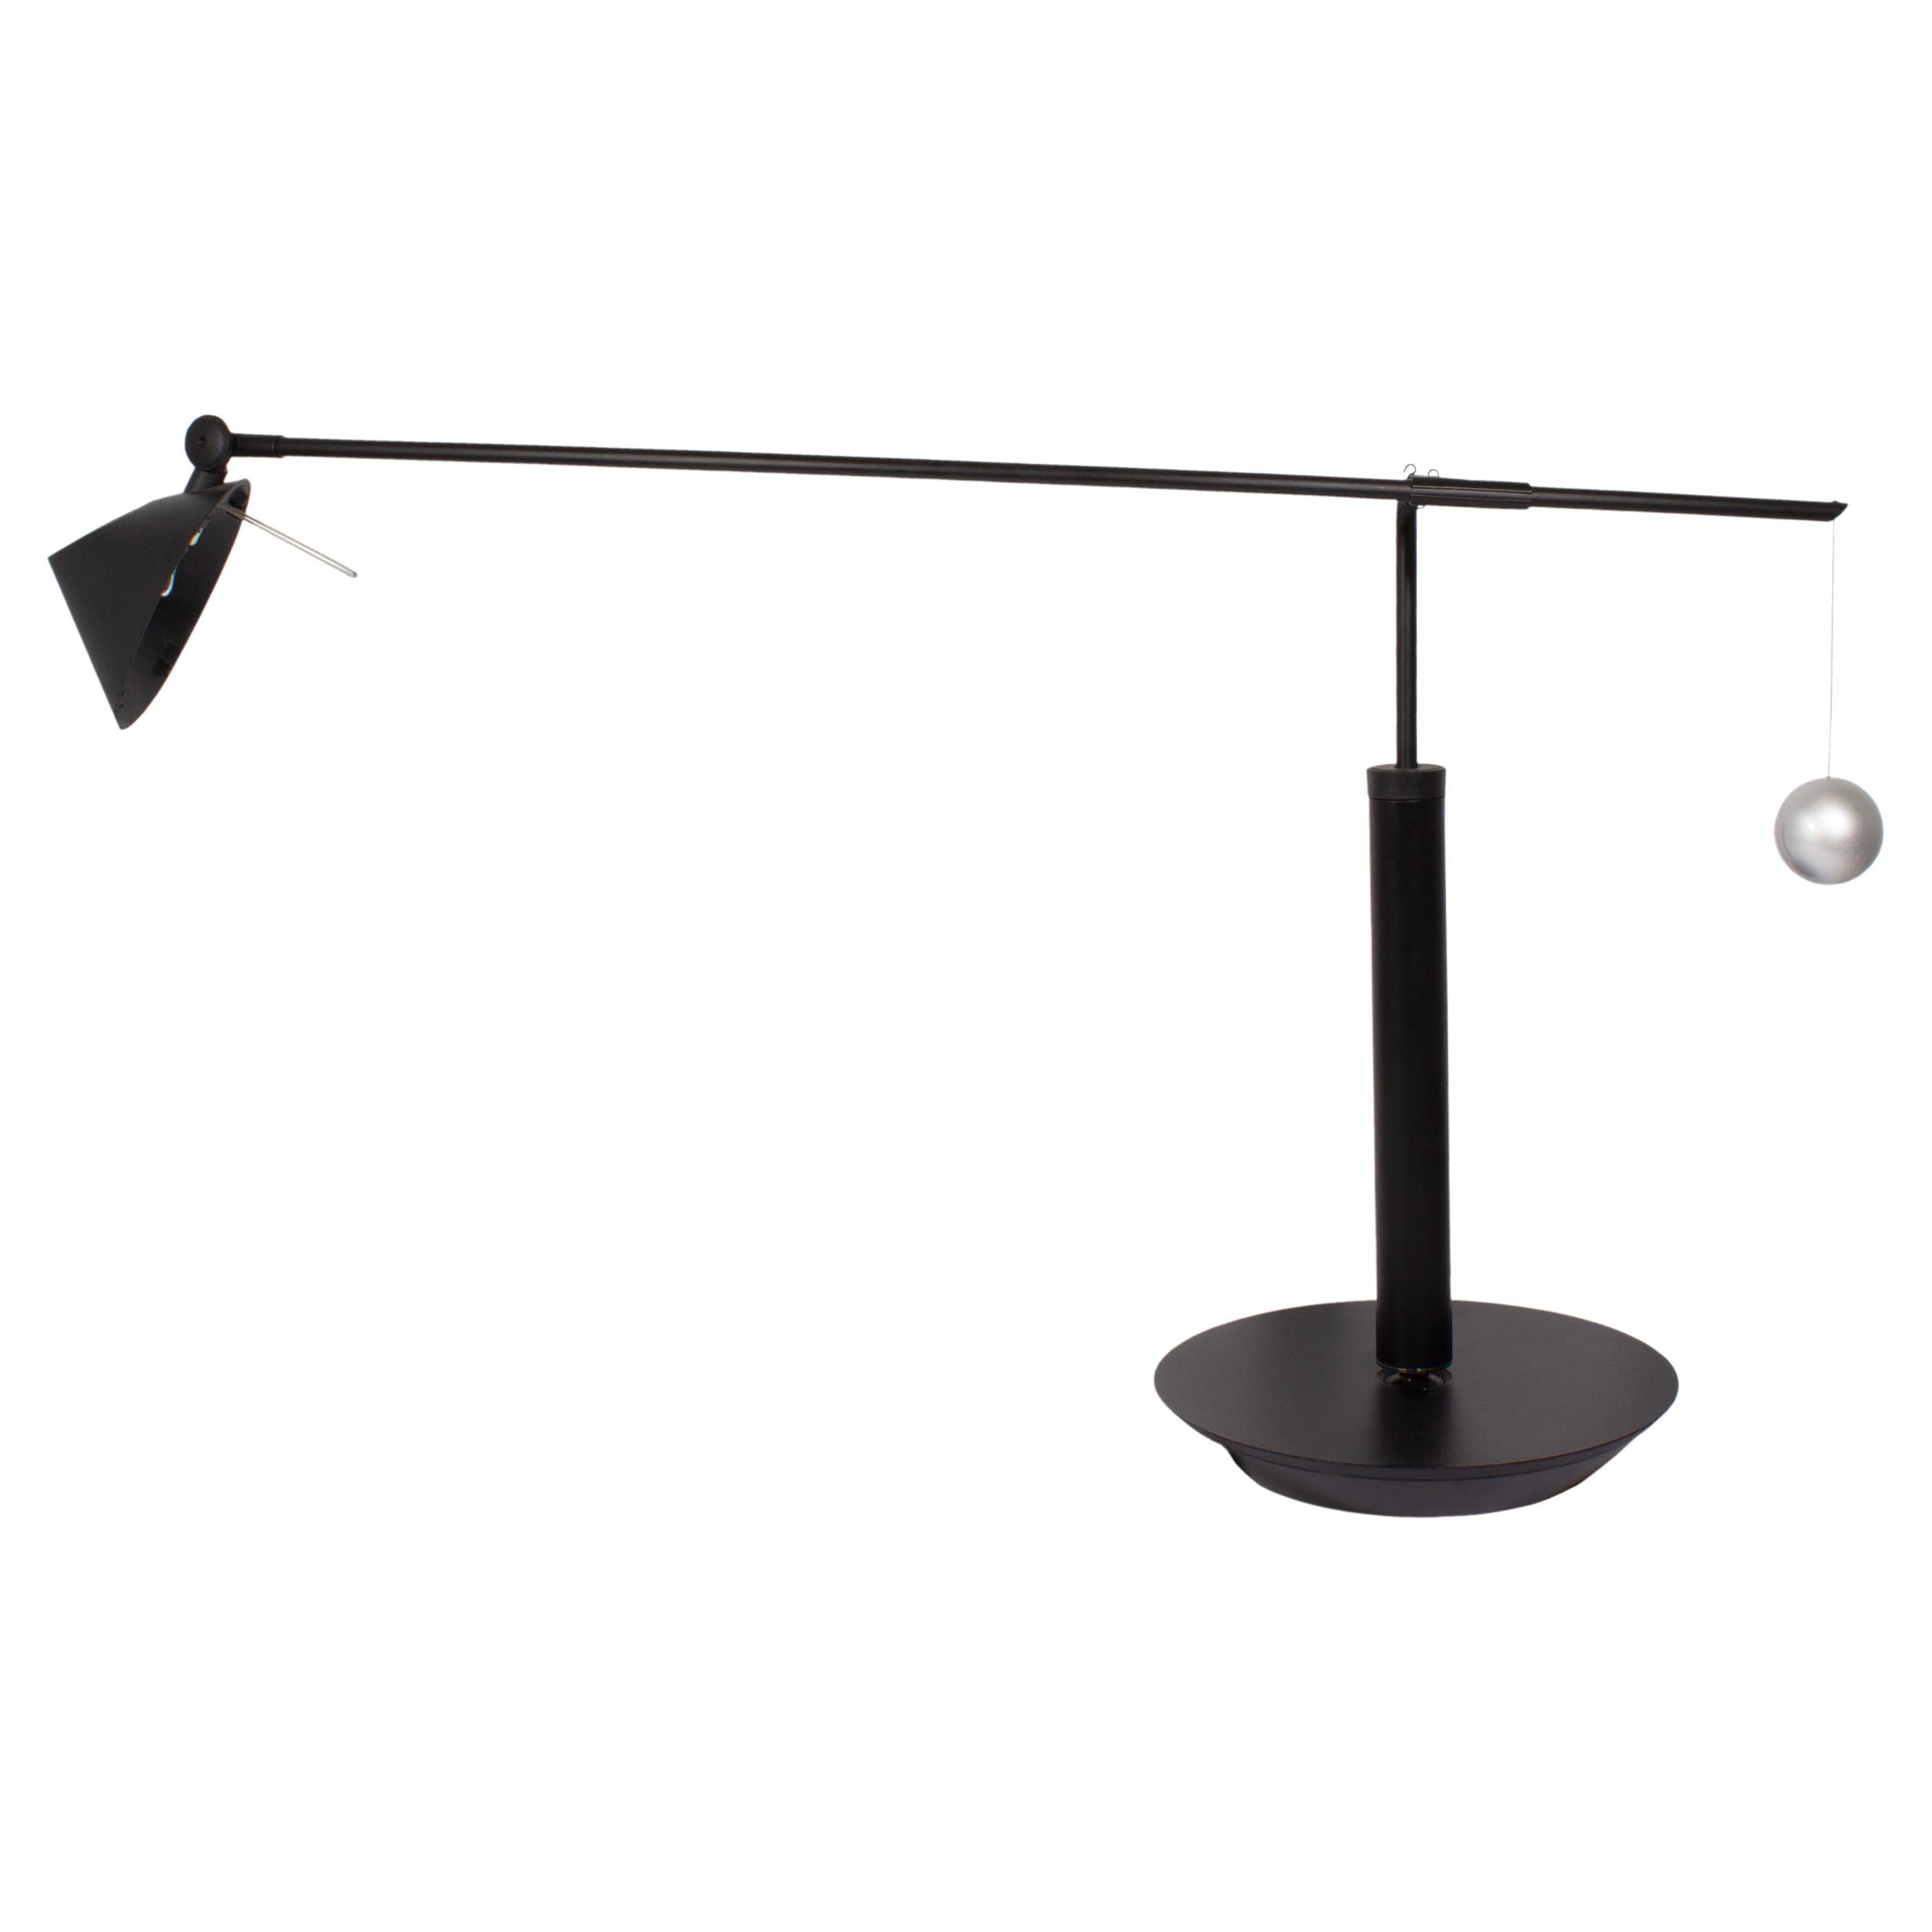 Carlo Forcolini Artemide “Nestore Lettura” Postmodern Cantilever Table Lamp  For Sale at 1stDibs